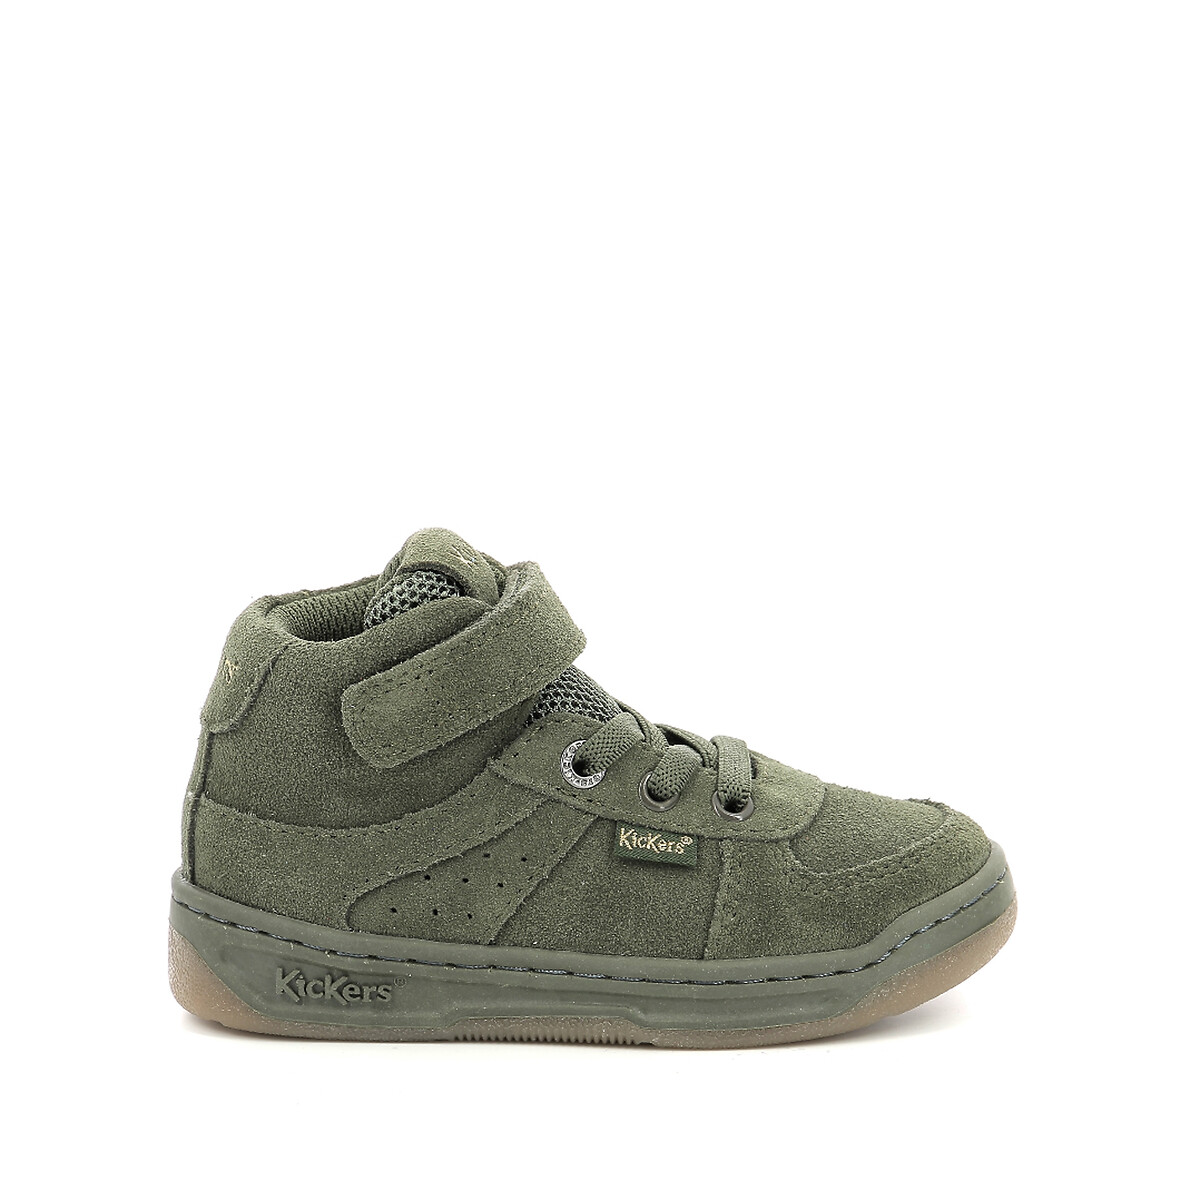 Kids Kickalien Suede High Top Trainers with Touch ’n’ Close Fastening